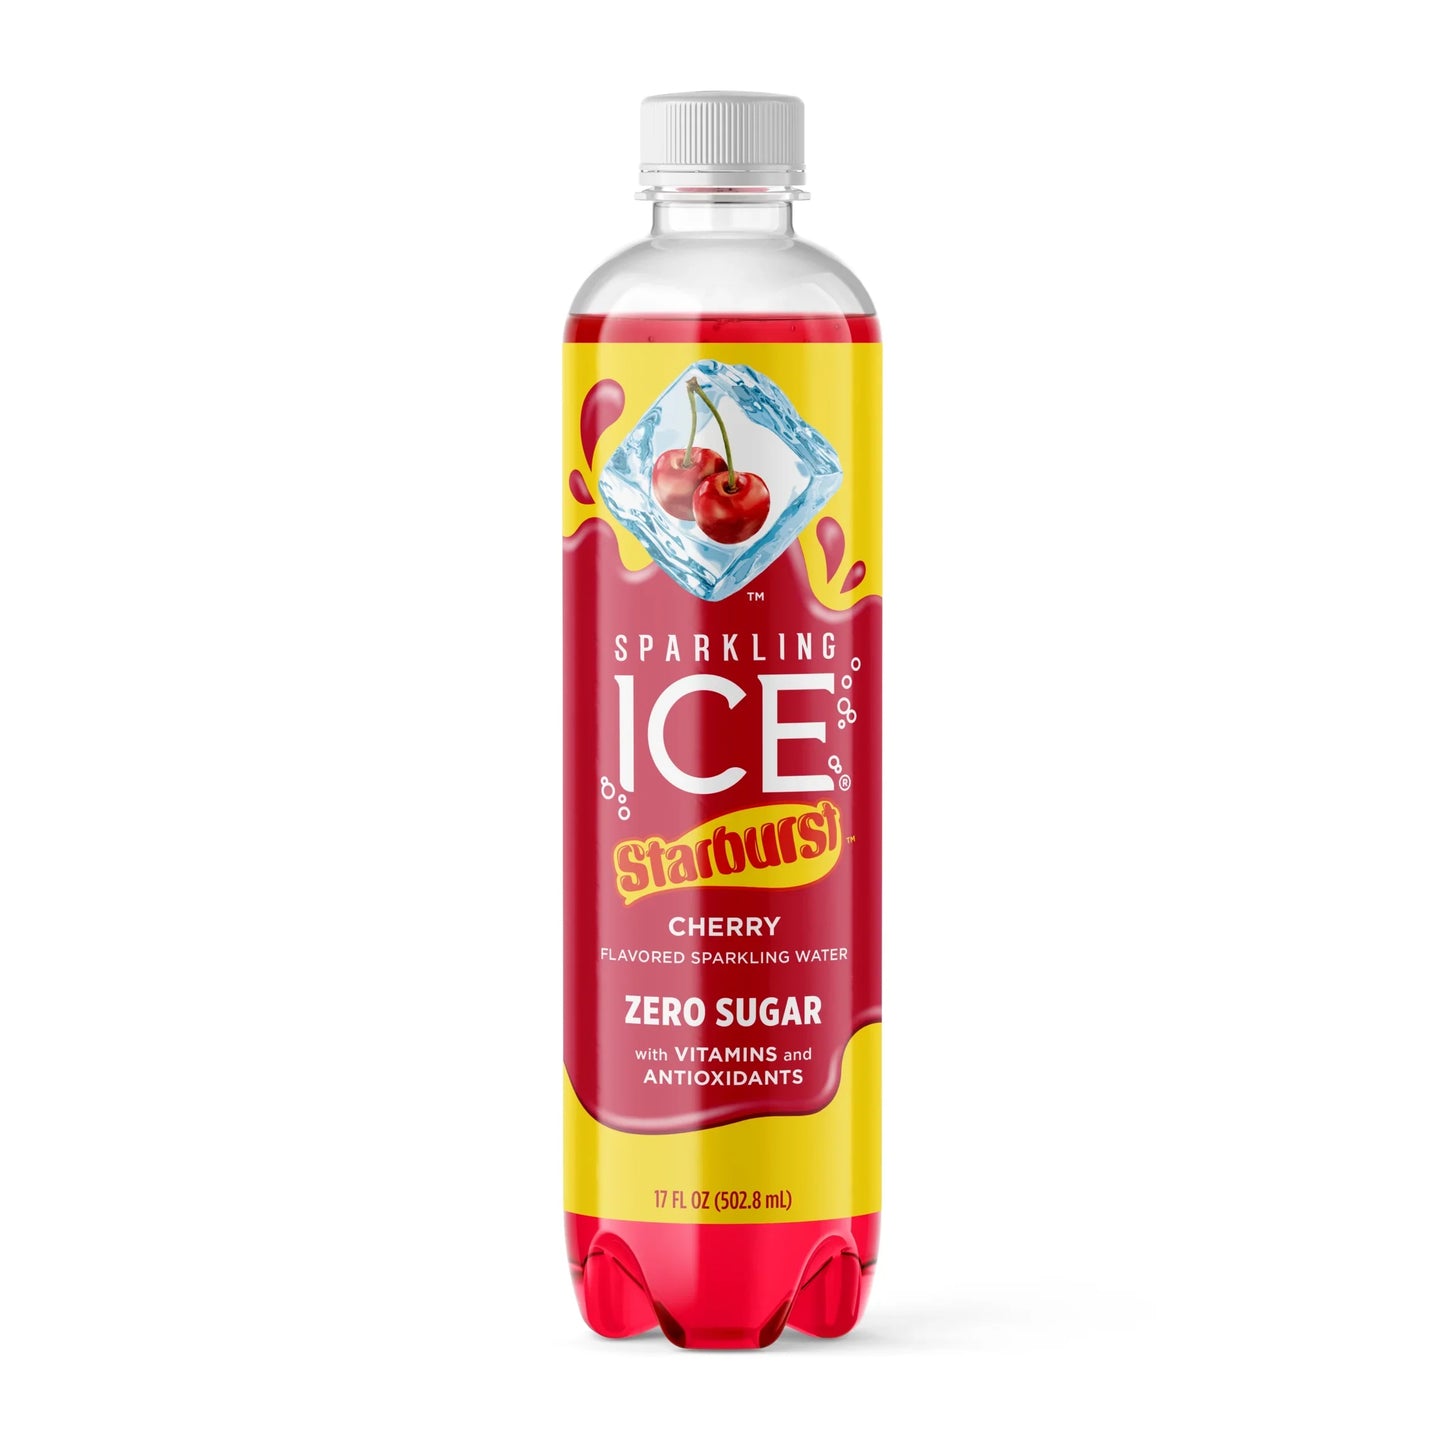 Sparkling Ice Starburst Cherry Zero Sugar 502ml X 12 Units(Shipping Included) - Québec Candy